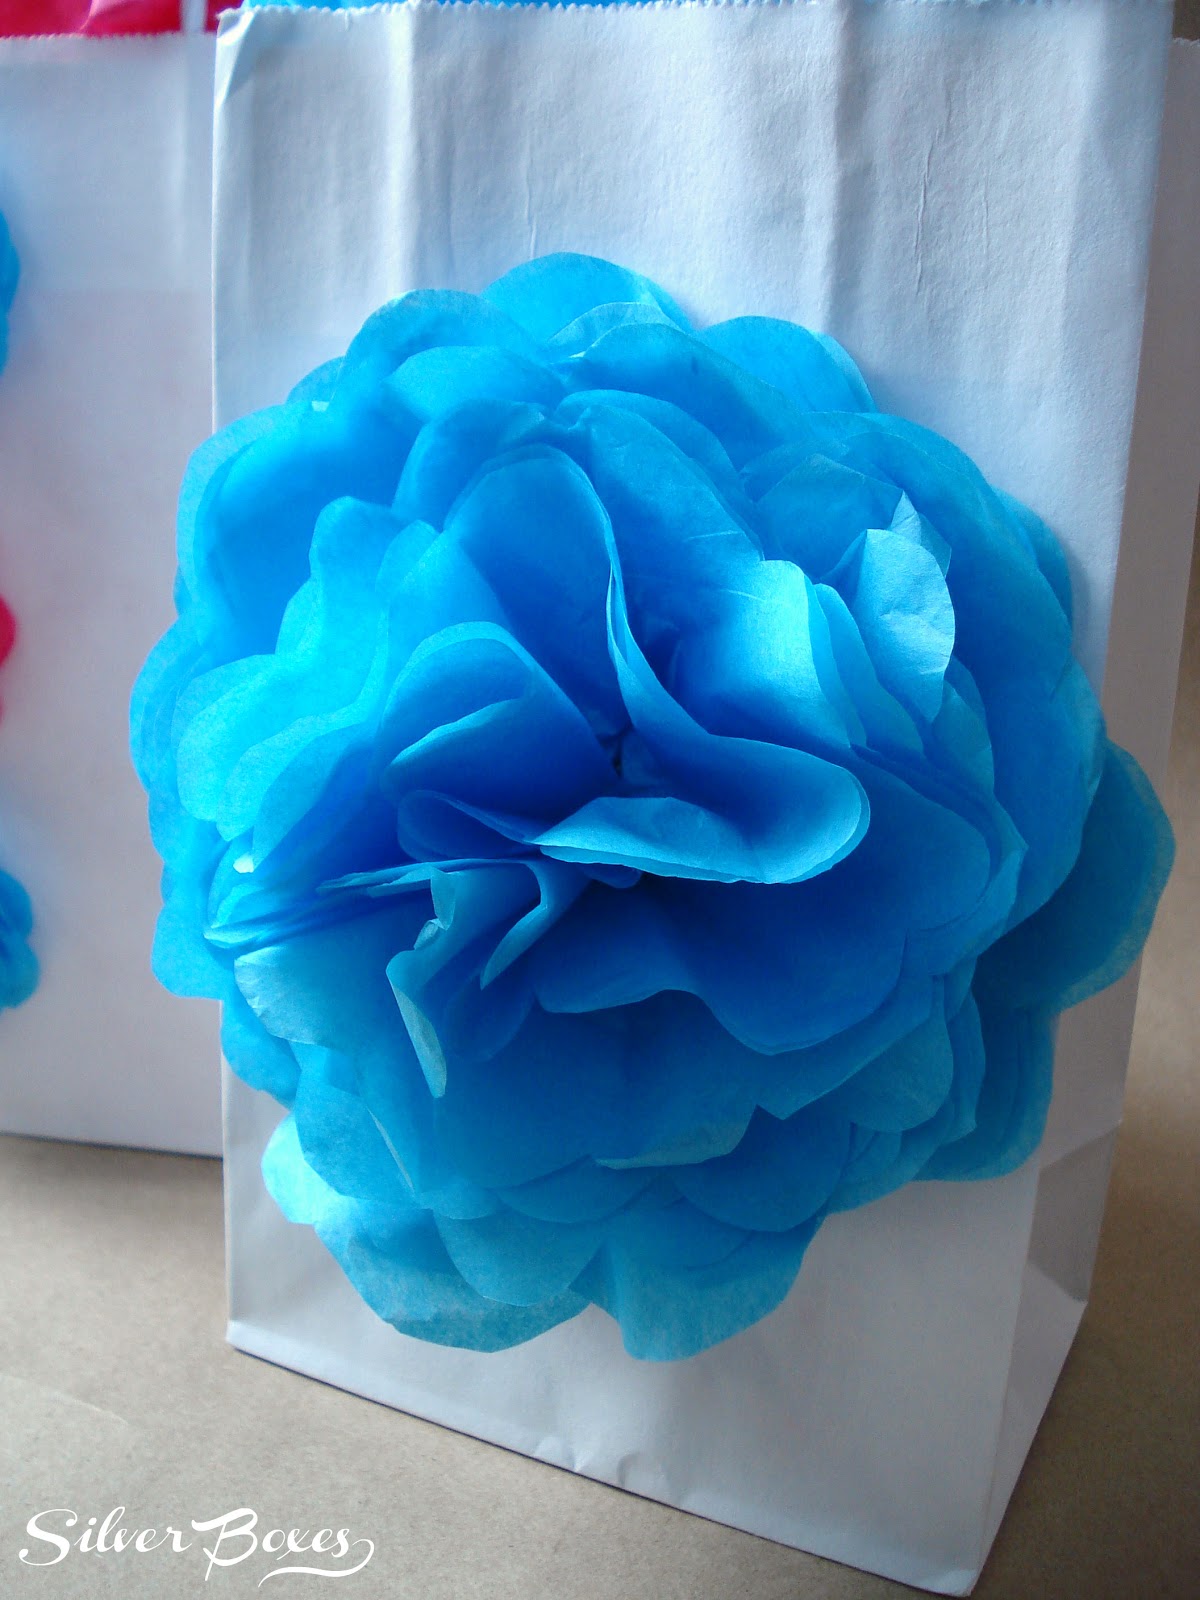 Silver Boxes: How To Make Tissue Paper Flowers